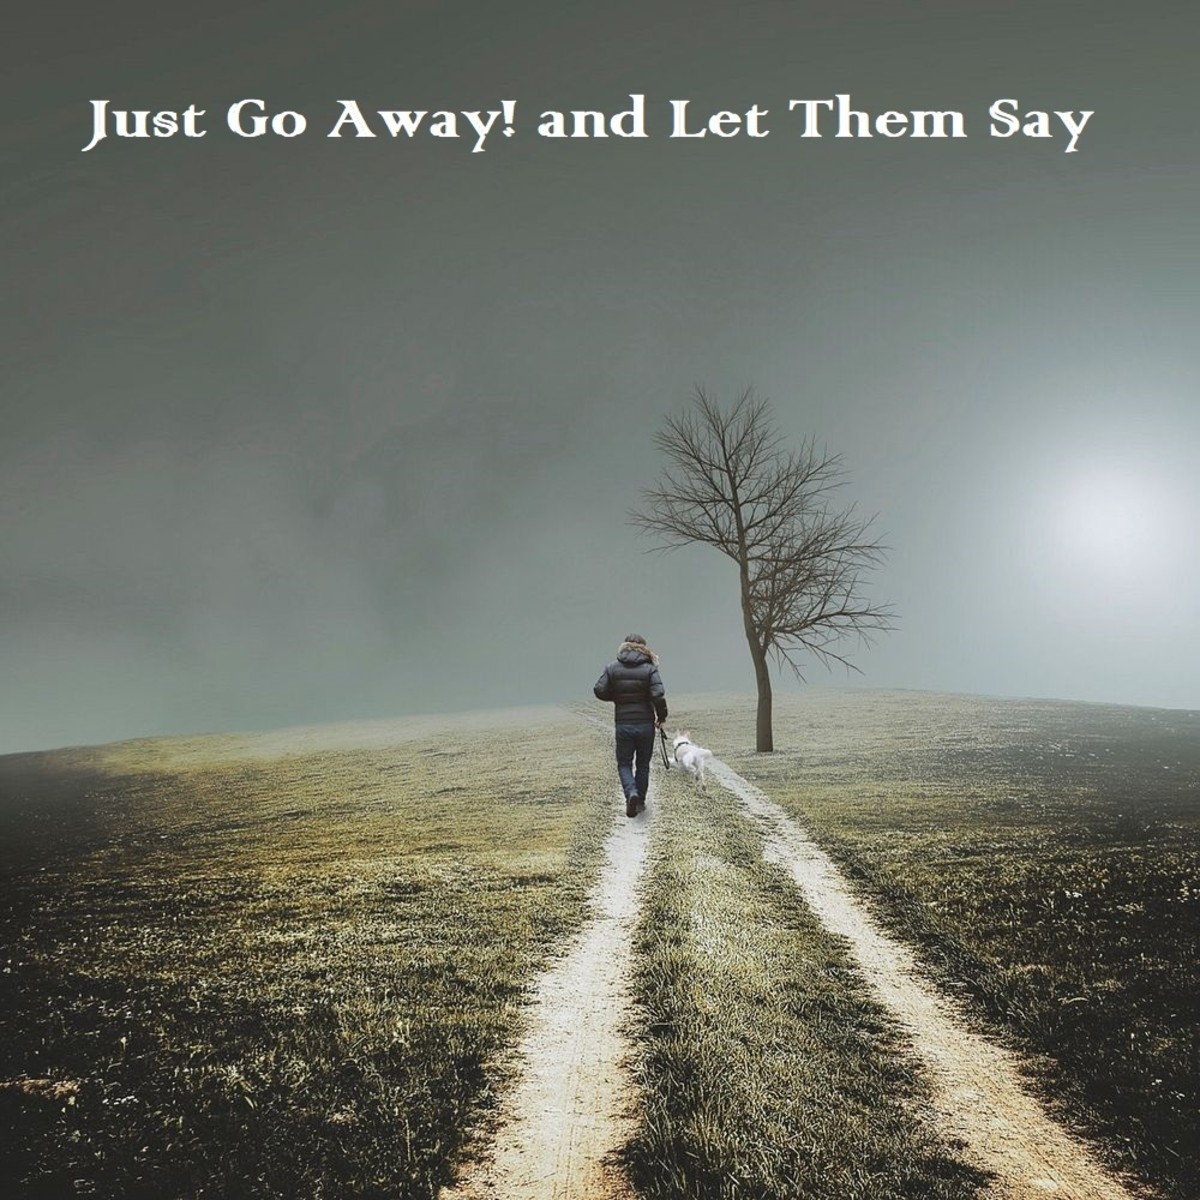 Just Go Away! and Let Them Say